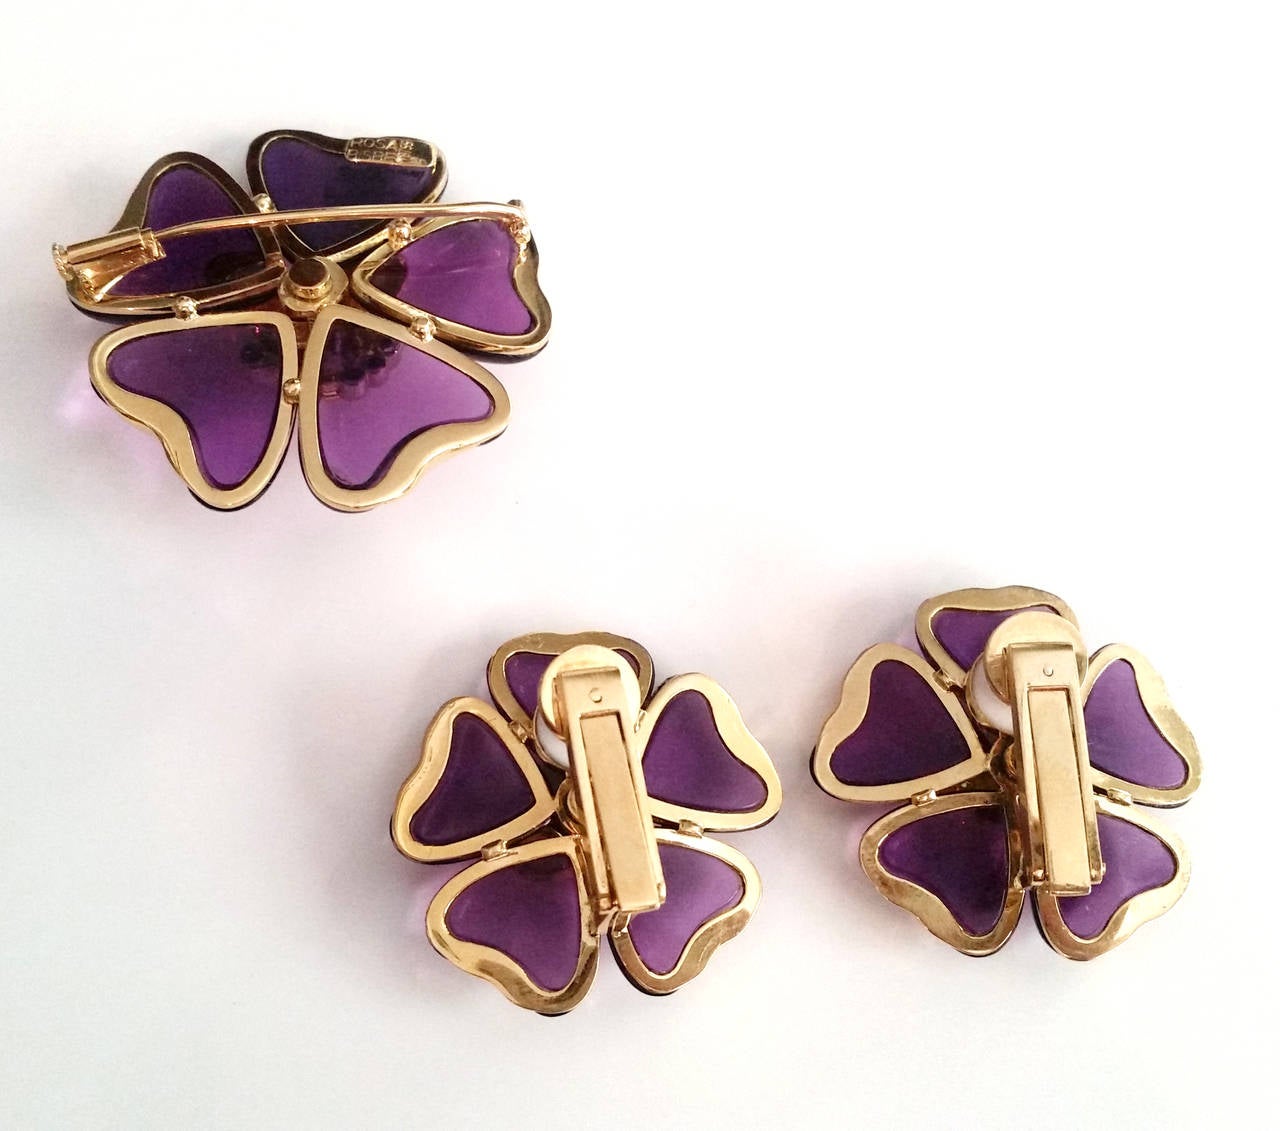 Earrings and Brooch Flower Suite
Signed by Spanish Jeweller Rosa Bisbe
18k yellow gold with amethyst petals, brilliant cut diamonds (total weight 1.37ct approx.) and gemset centers

Measurements:

Brooch: 4.5 x 4.5 cm
Earrings 3.5 x 3.5